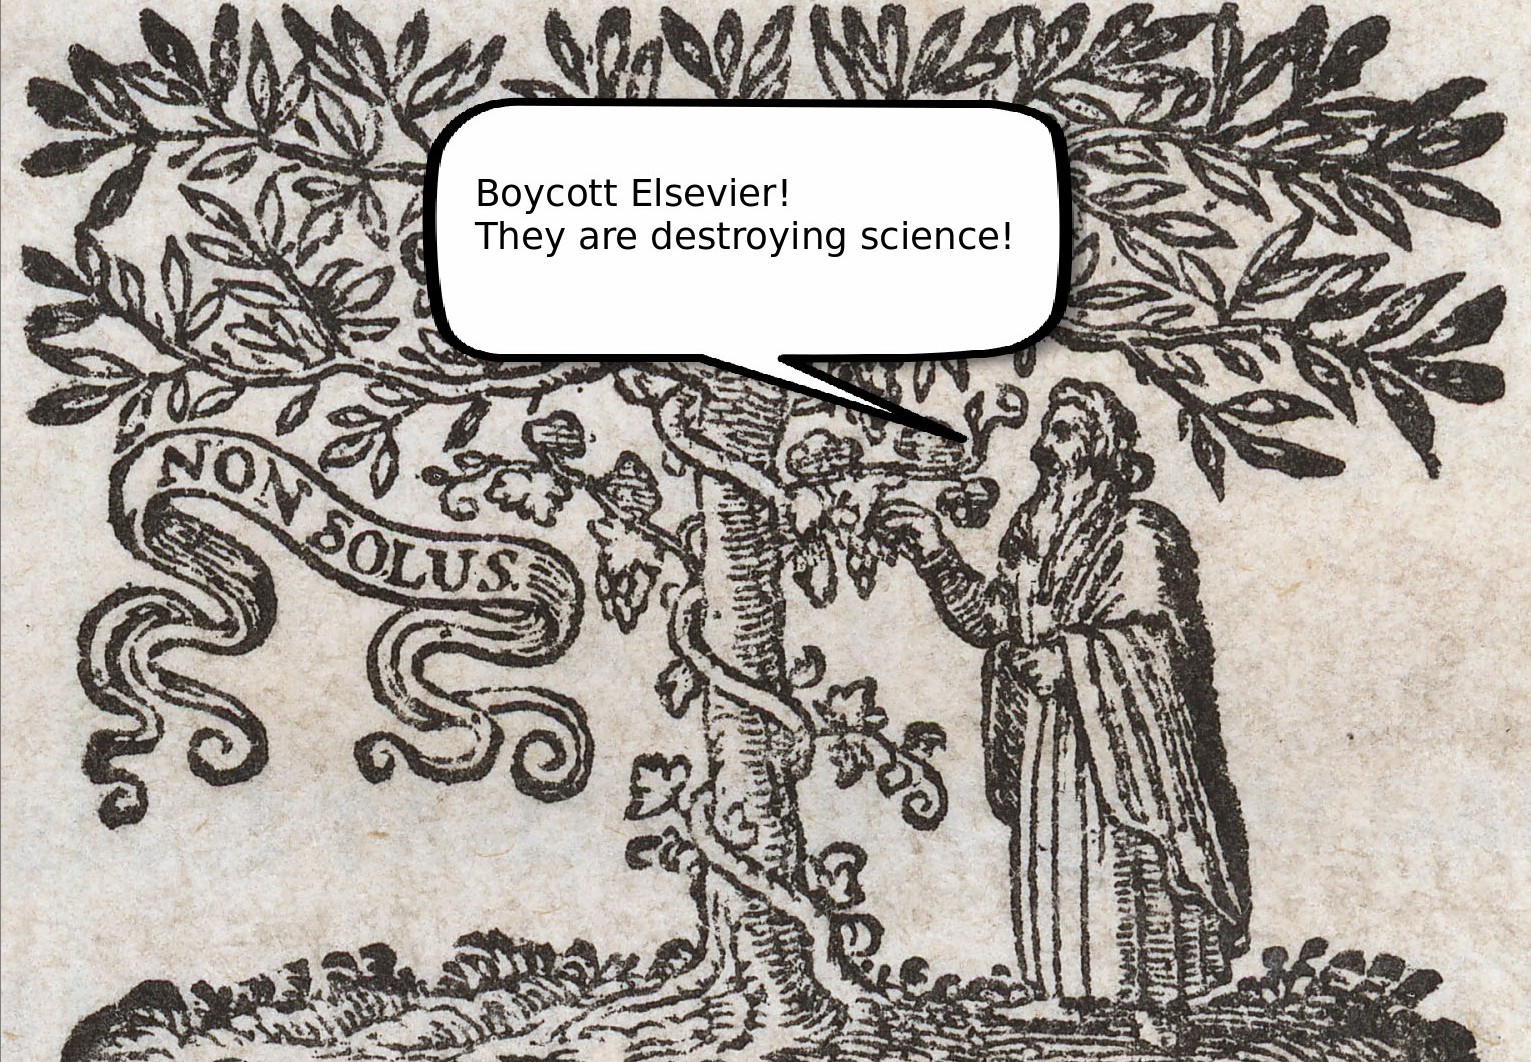 The source of inspiration for Elsevier’s logo, updated with a statement to boycott Elsevier.